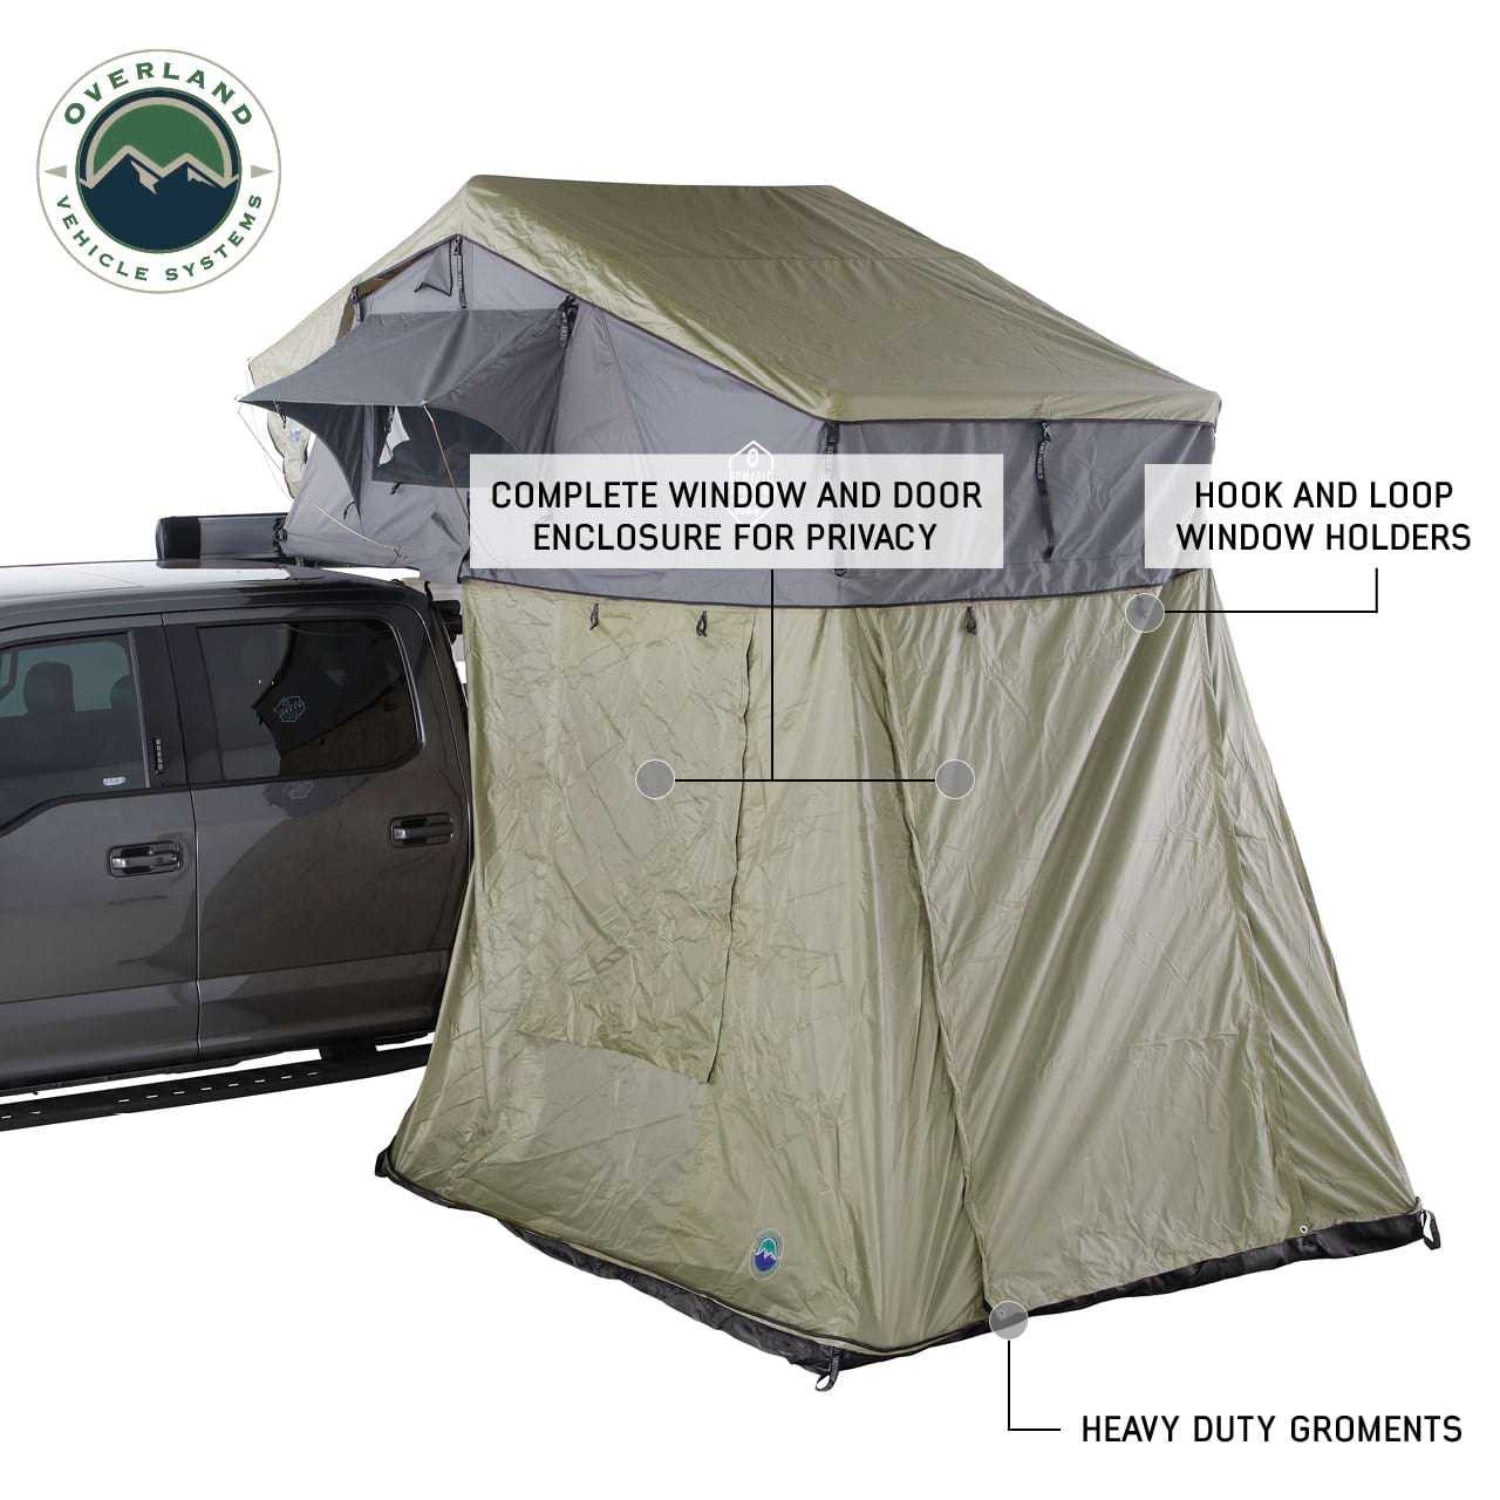 Overland Vehicle Systems Nomadic 2 Roof Top Tent Annex Green Base With Black Floor